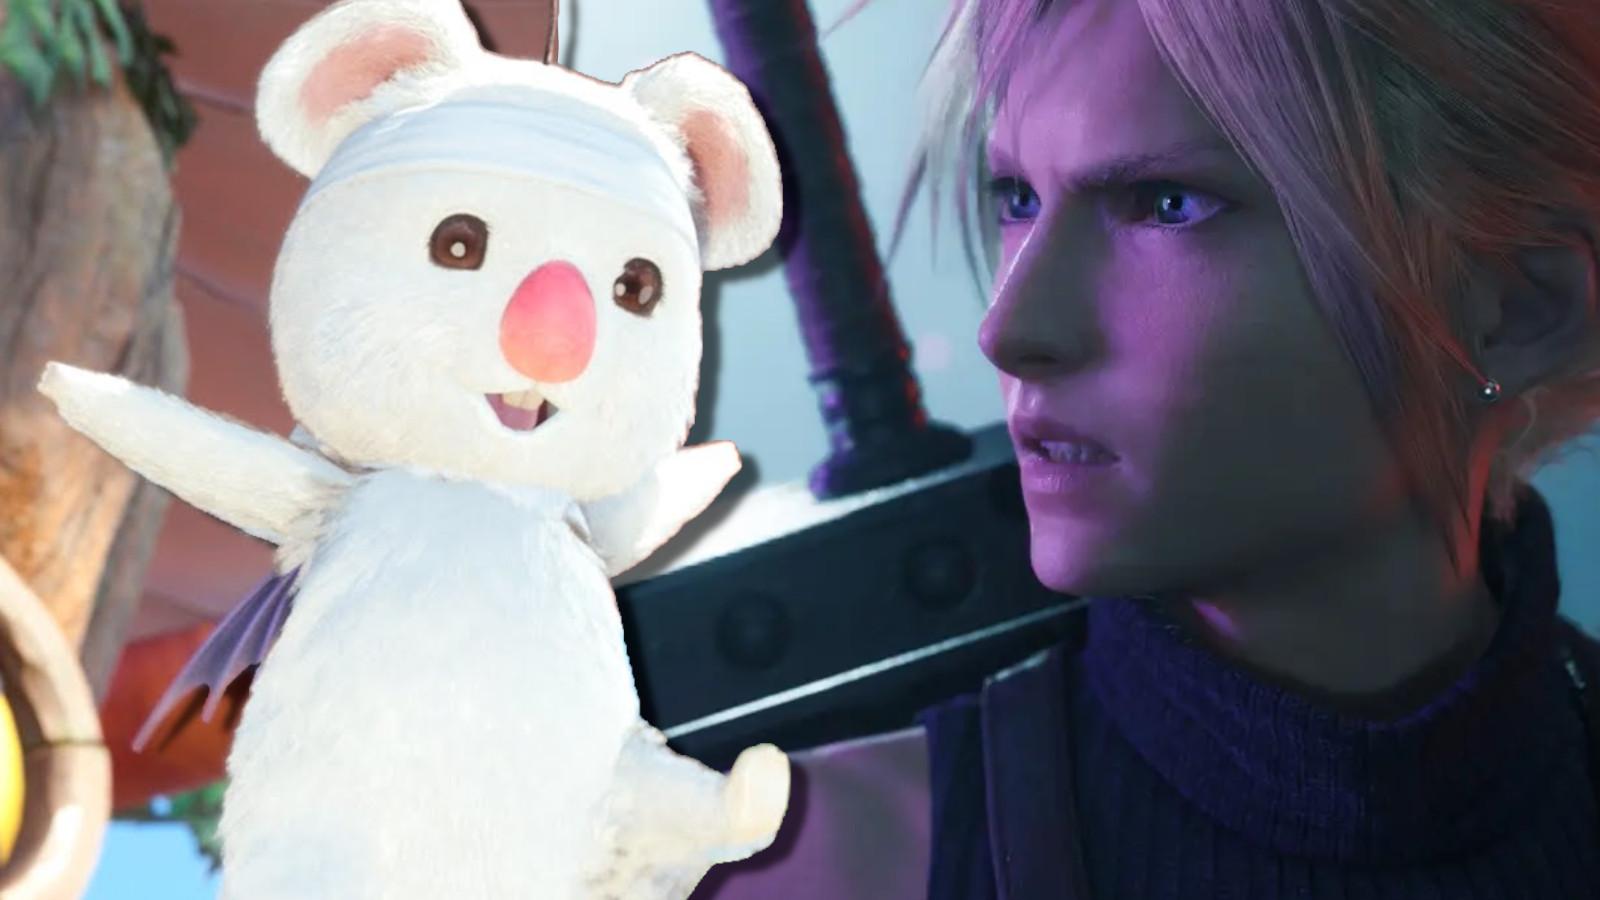 Cloud Strife staring at a Moogle